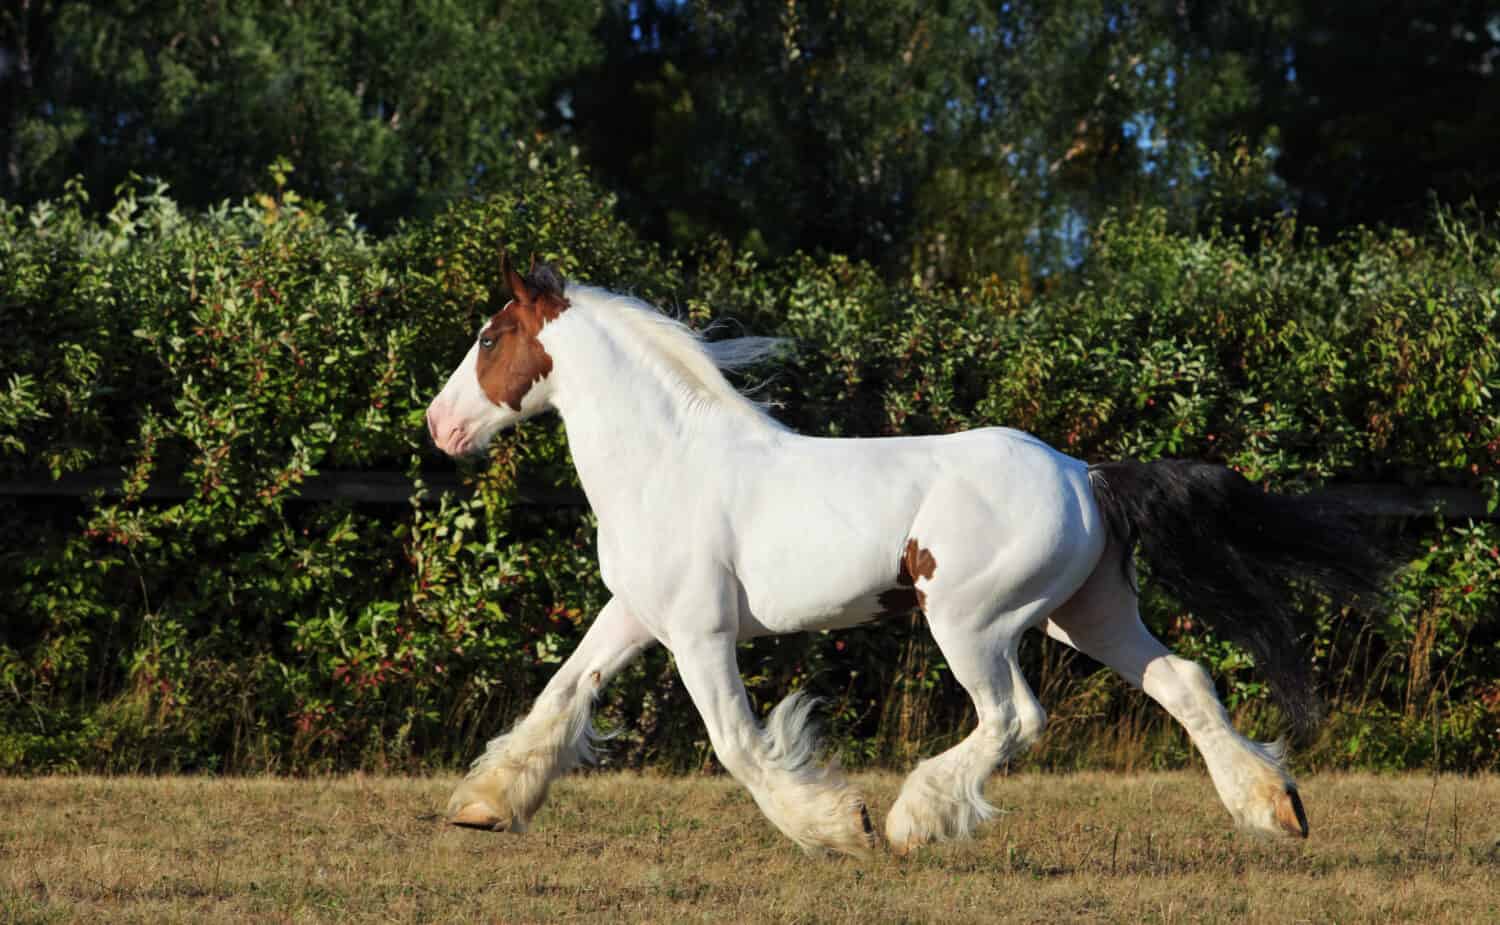 American Drum Horse is a modern American breed of heavy horse of draft type